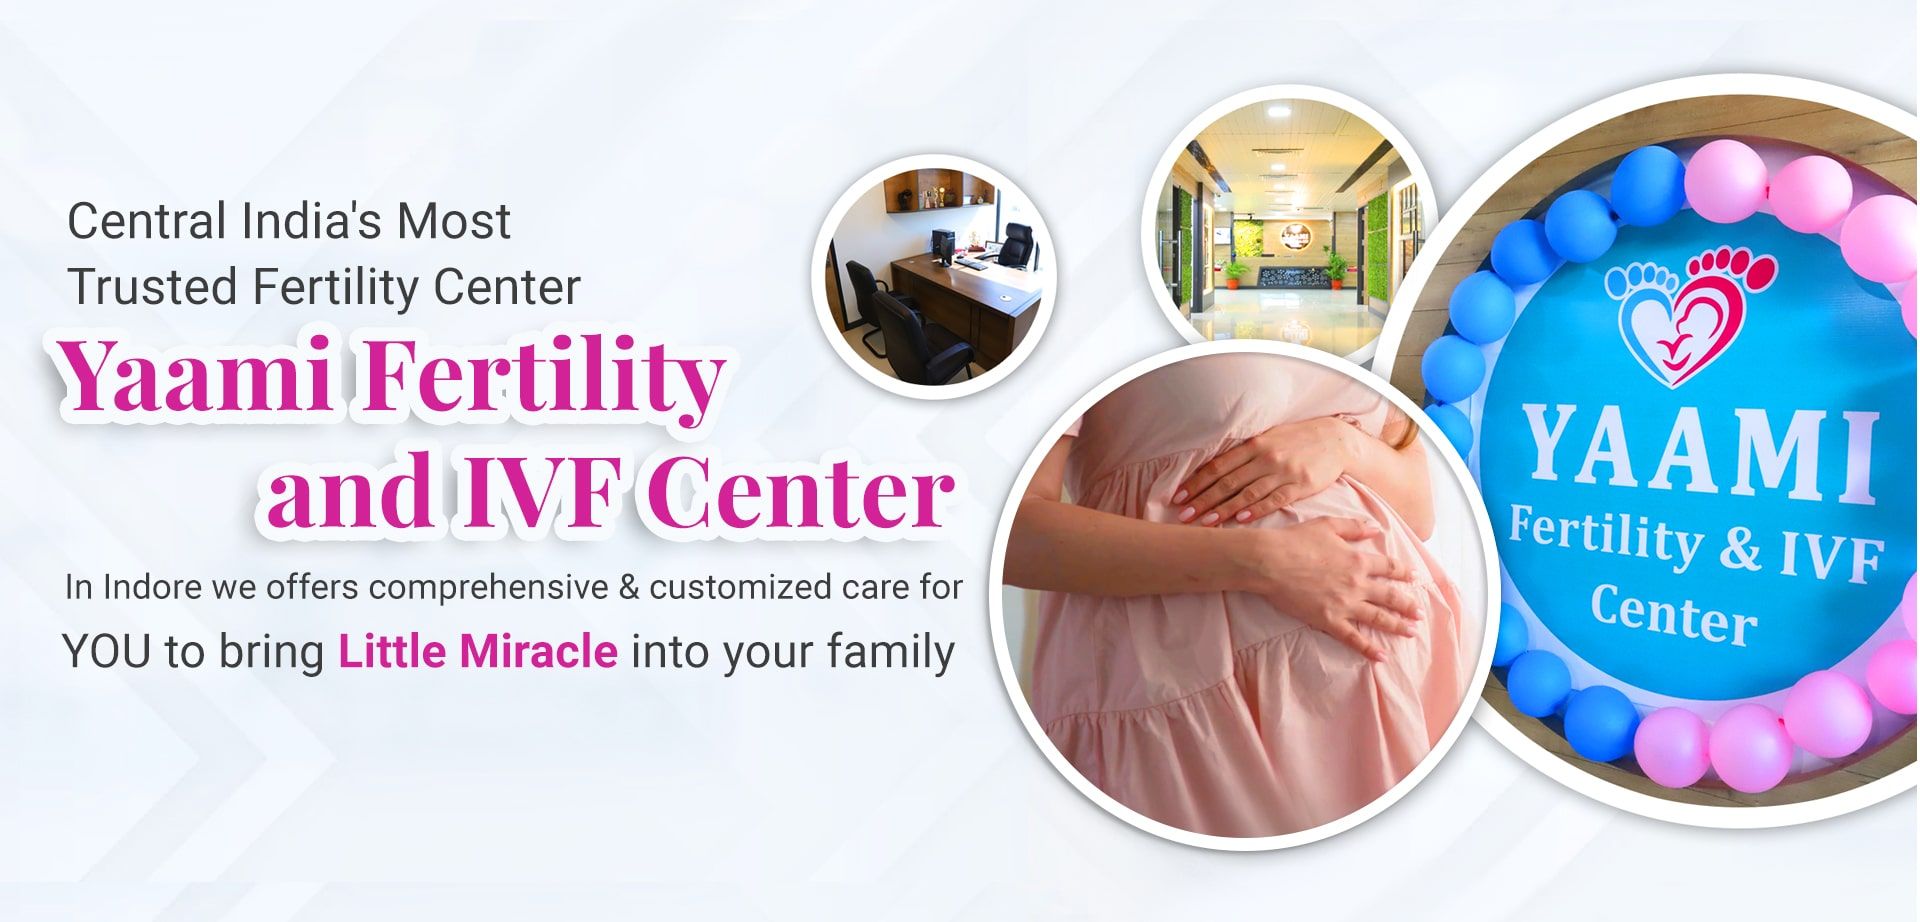 Fertility Specialist in Indore